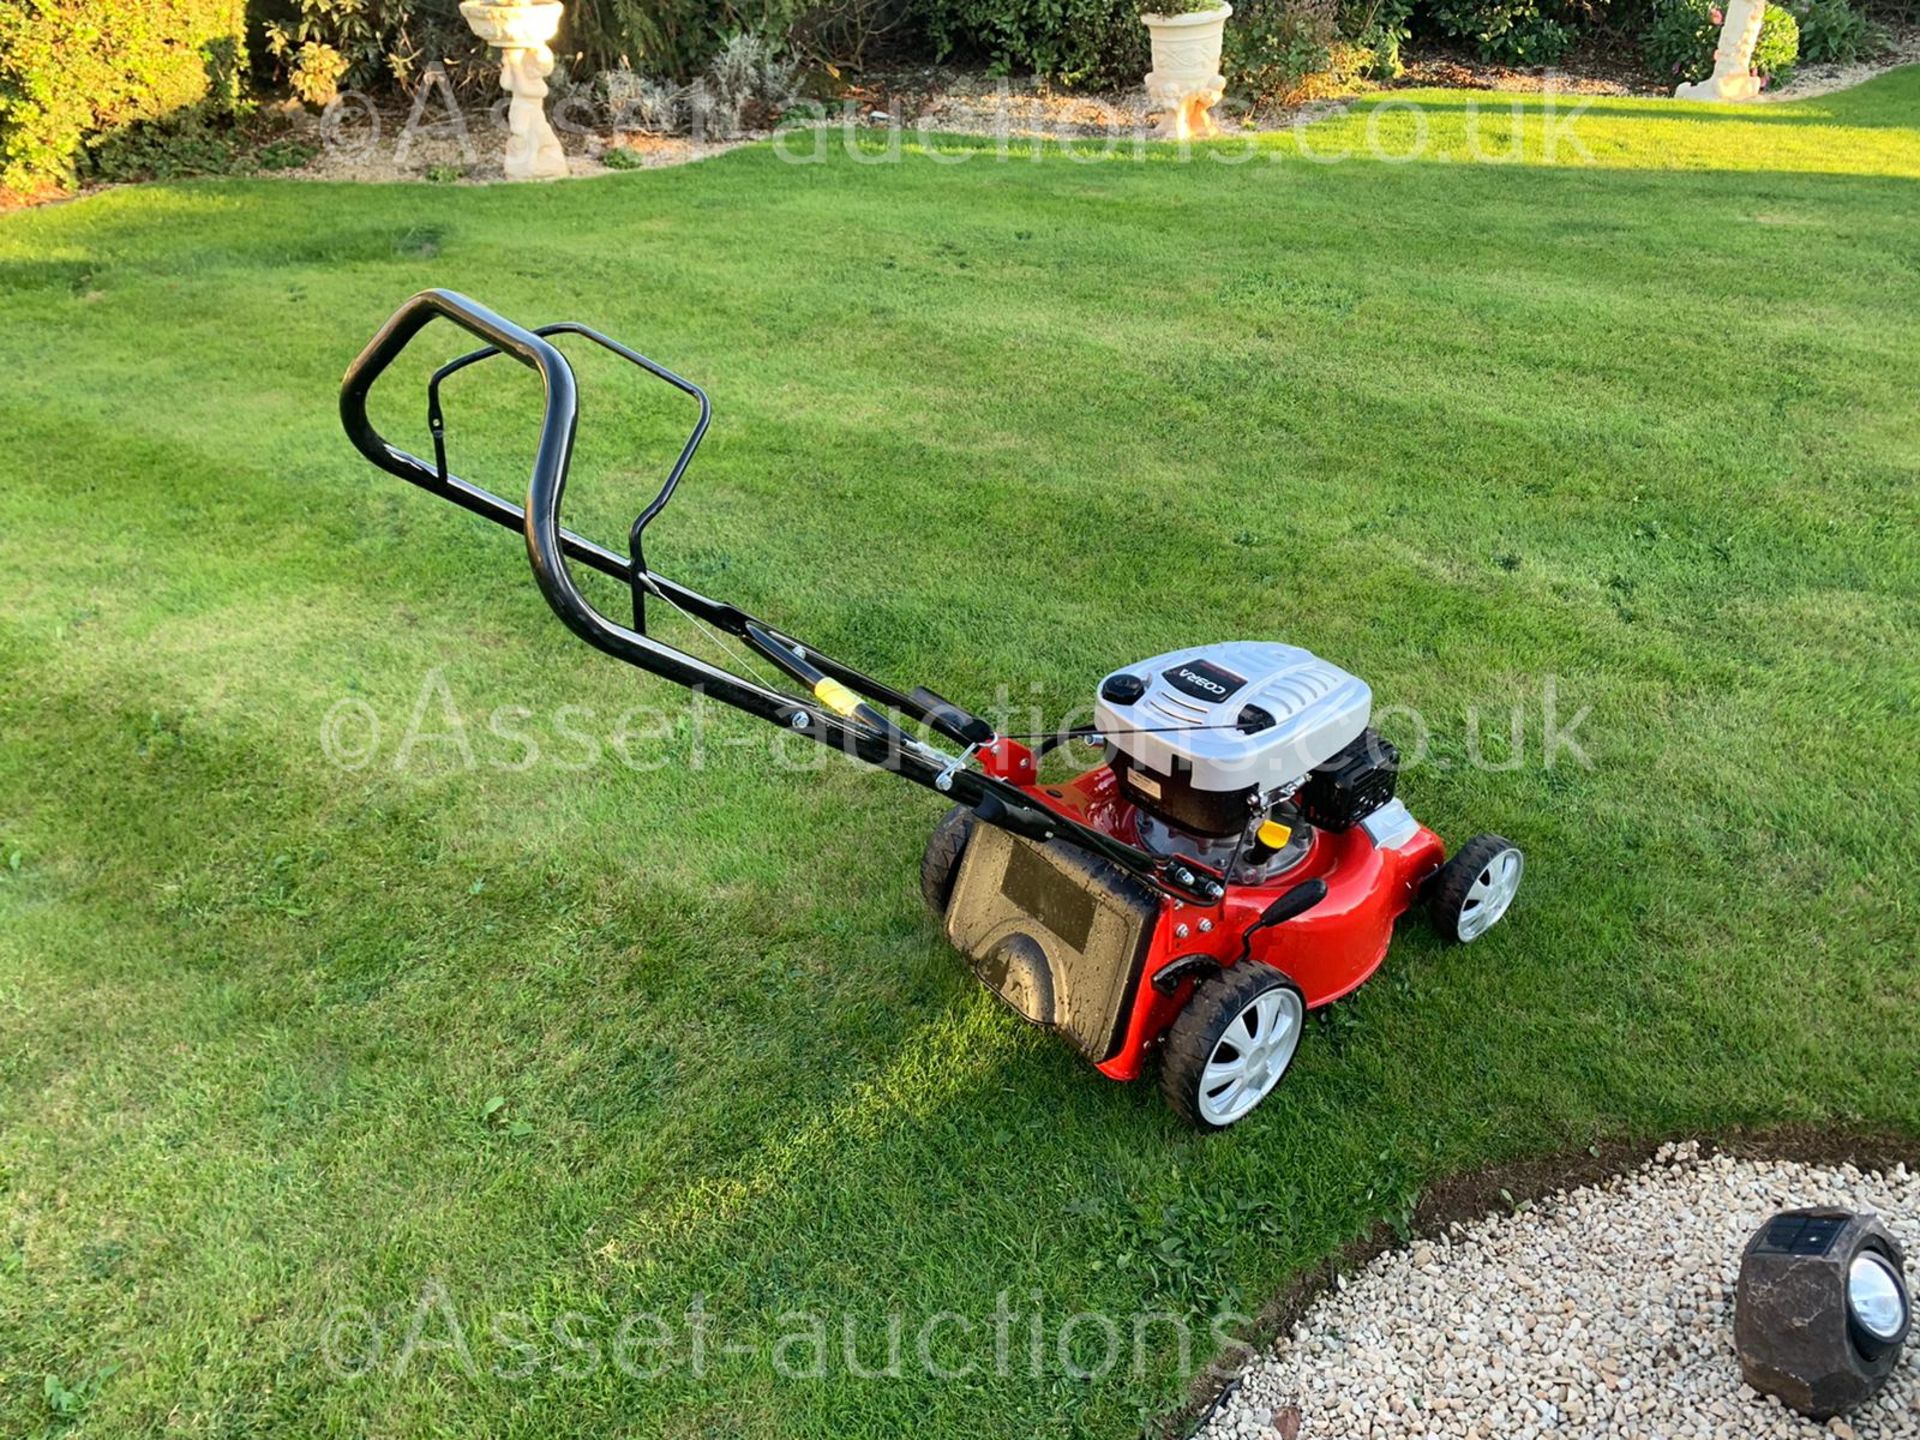 2016 COBRA M40C LAWN MOWER, RUNS AND WORKS WELL, ONLY USED A FEW TIMES, PULL START *NO VAT* - Image 9 of 18